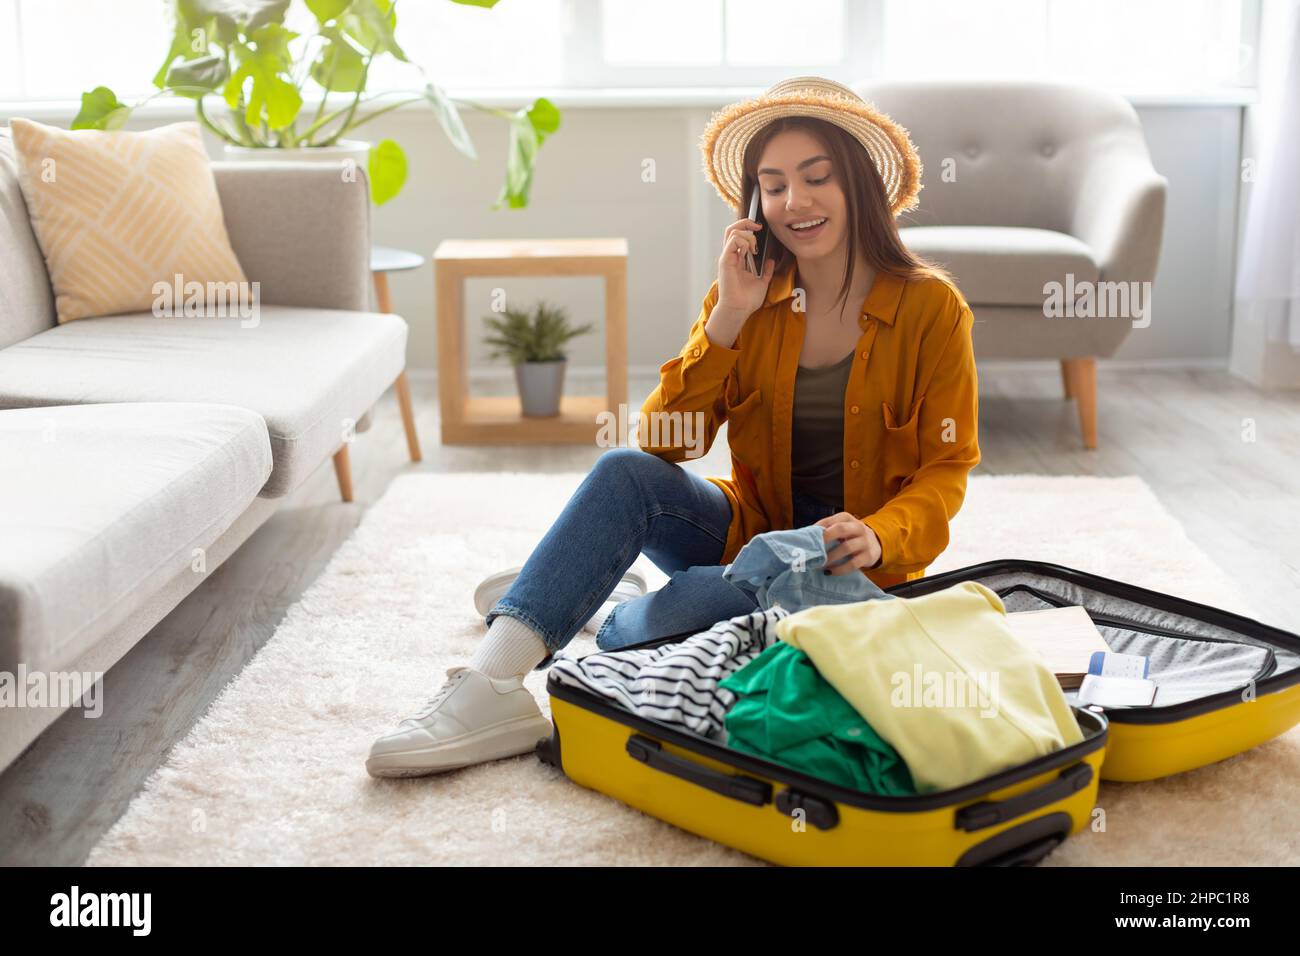 Cool woman sitting near suitcase, speaking on cellphone, booking travel tour, making hotel reservation or buying tickets Stock Photo